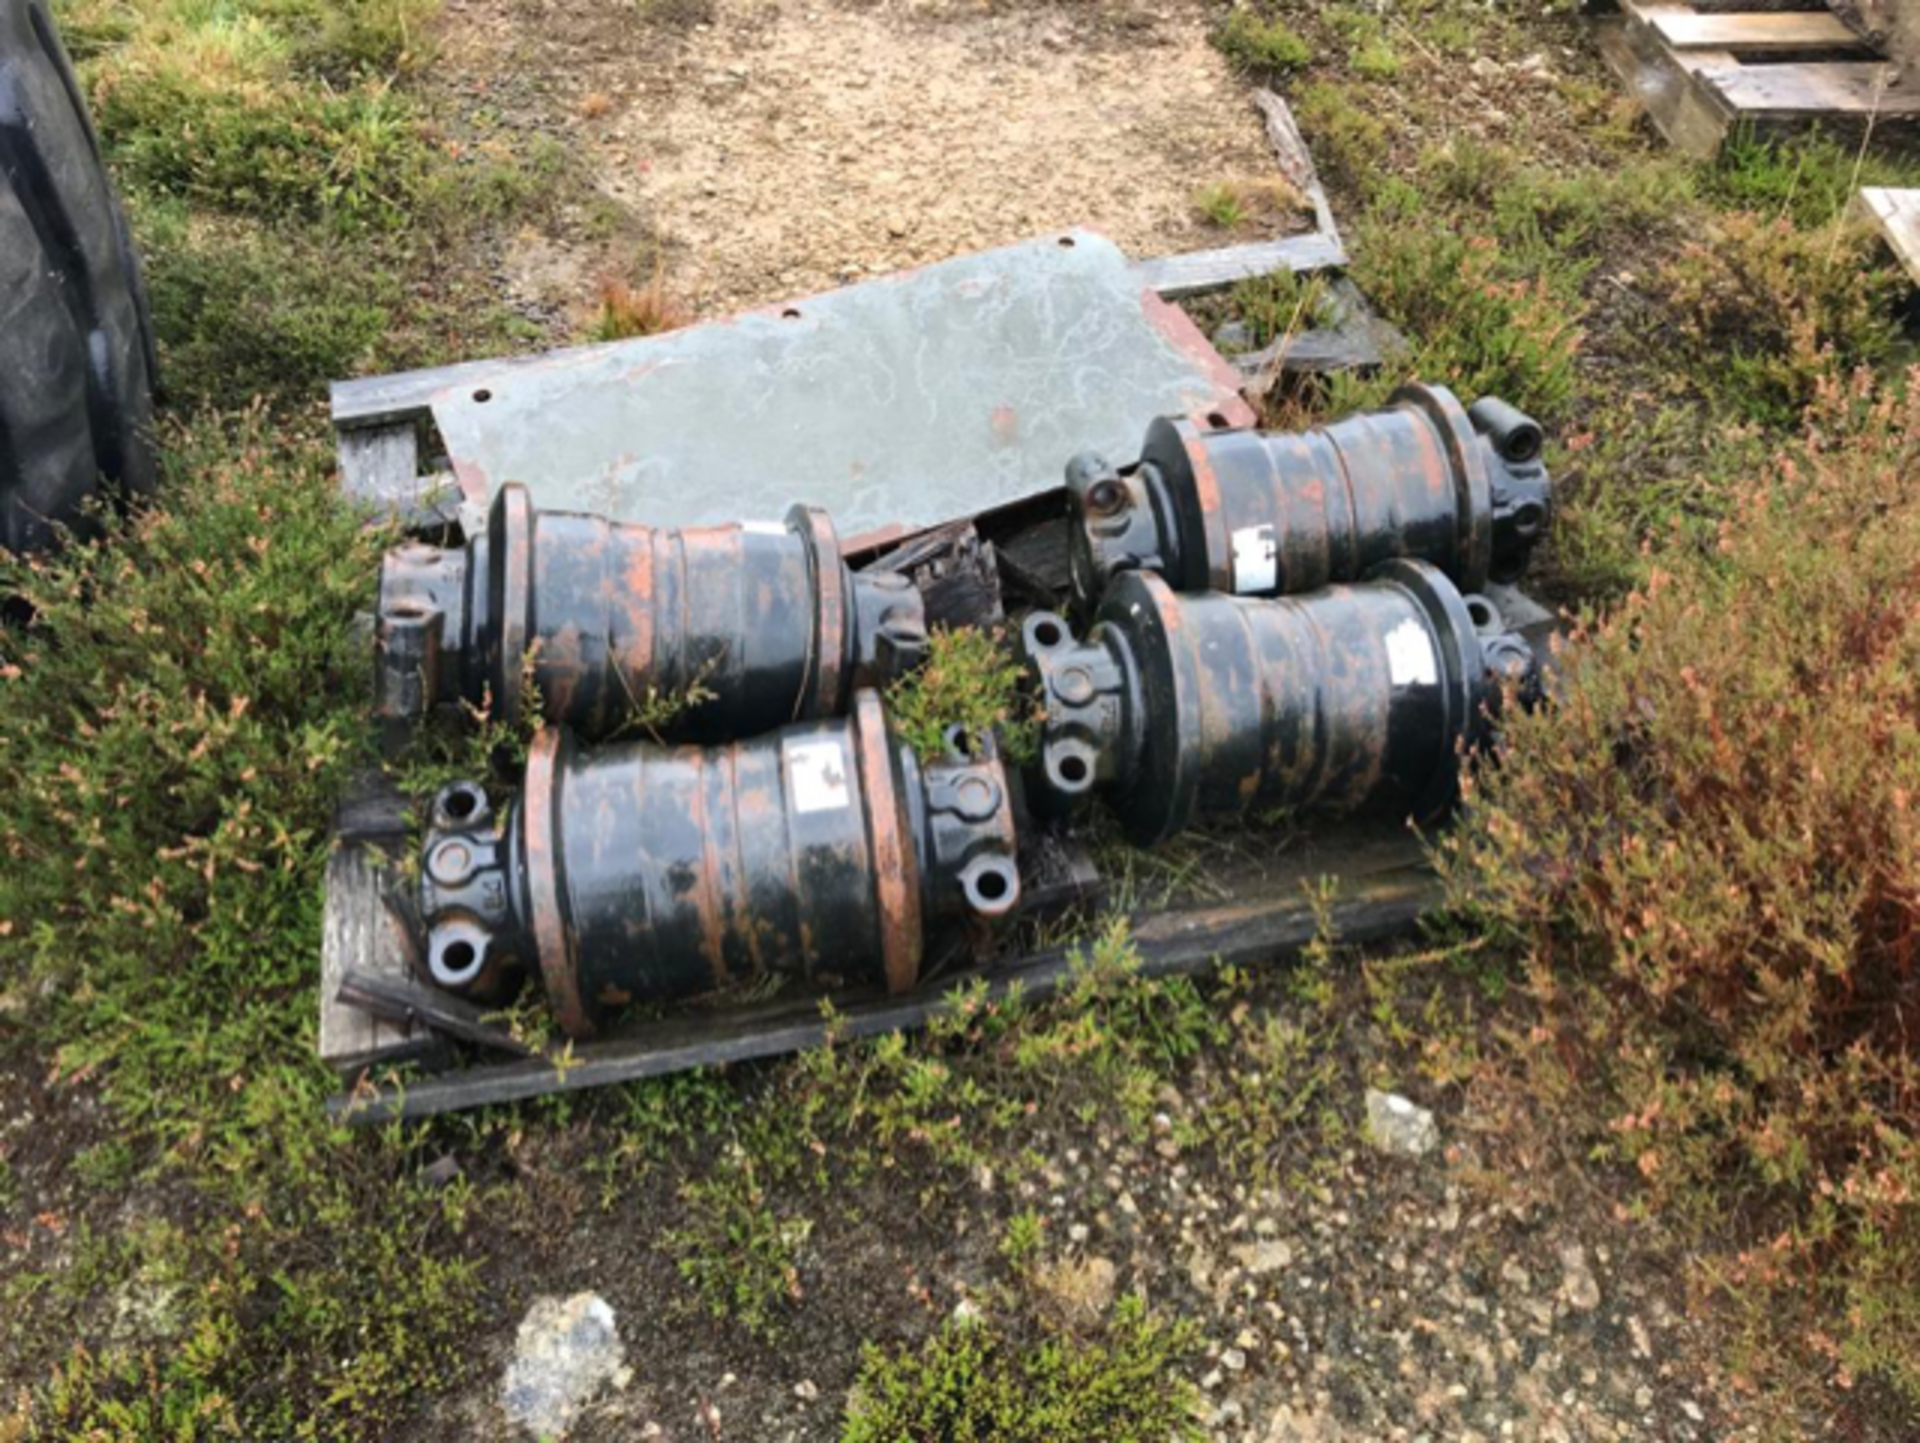 Rollers for Volvo 460 new you are bidding for 4 no not 1 is for 4 number